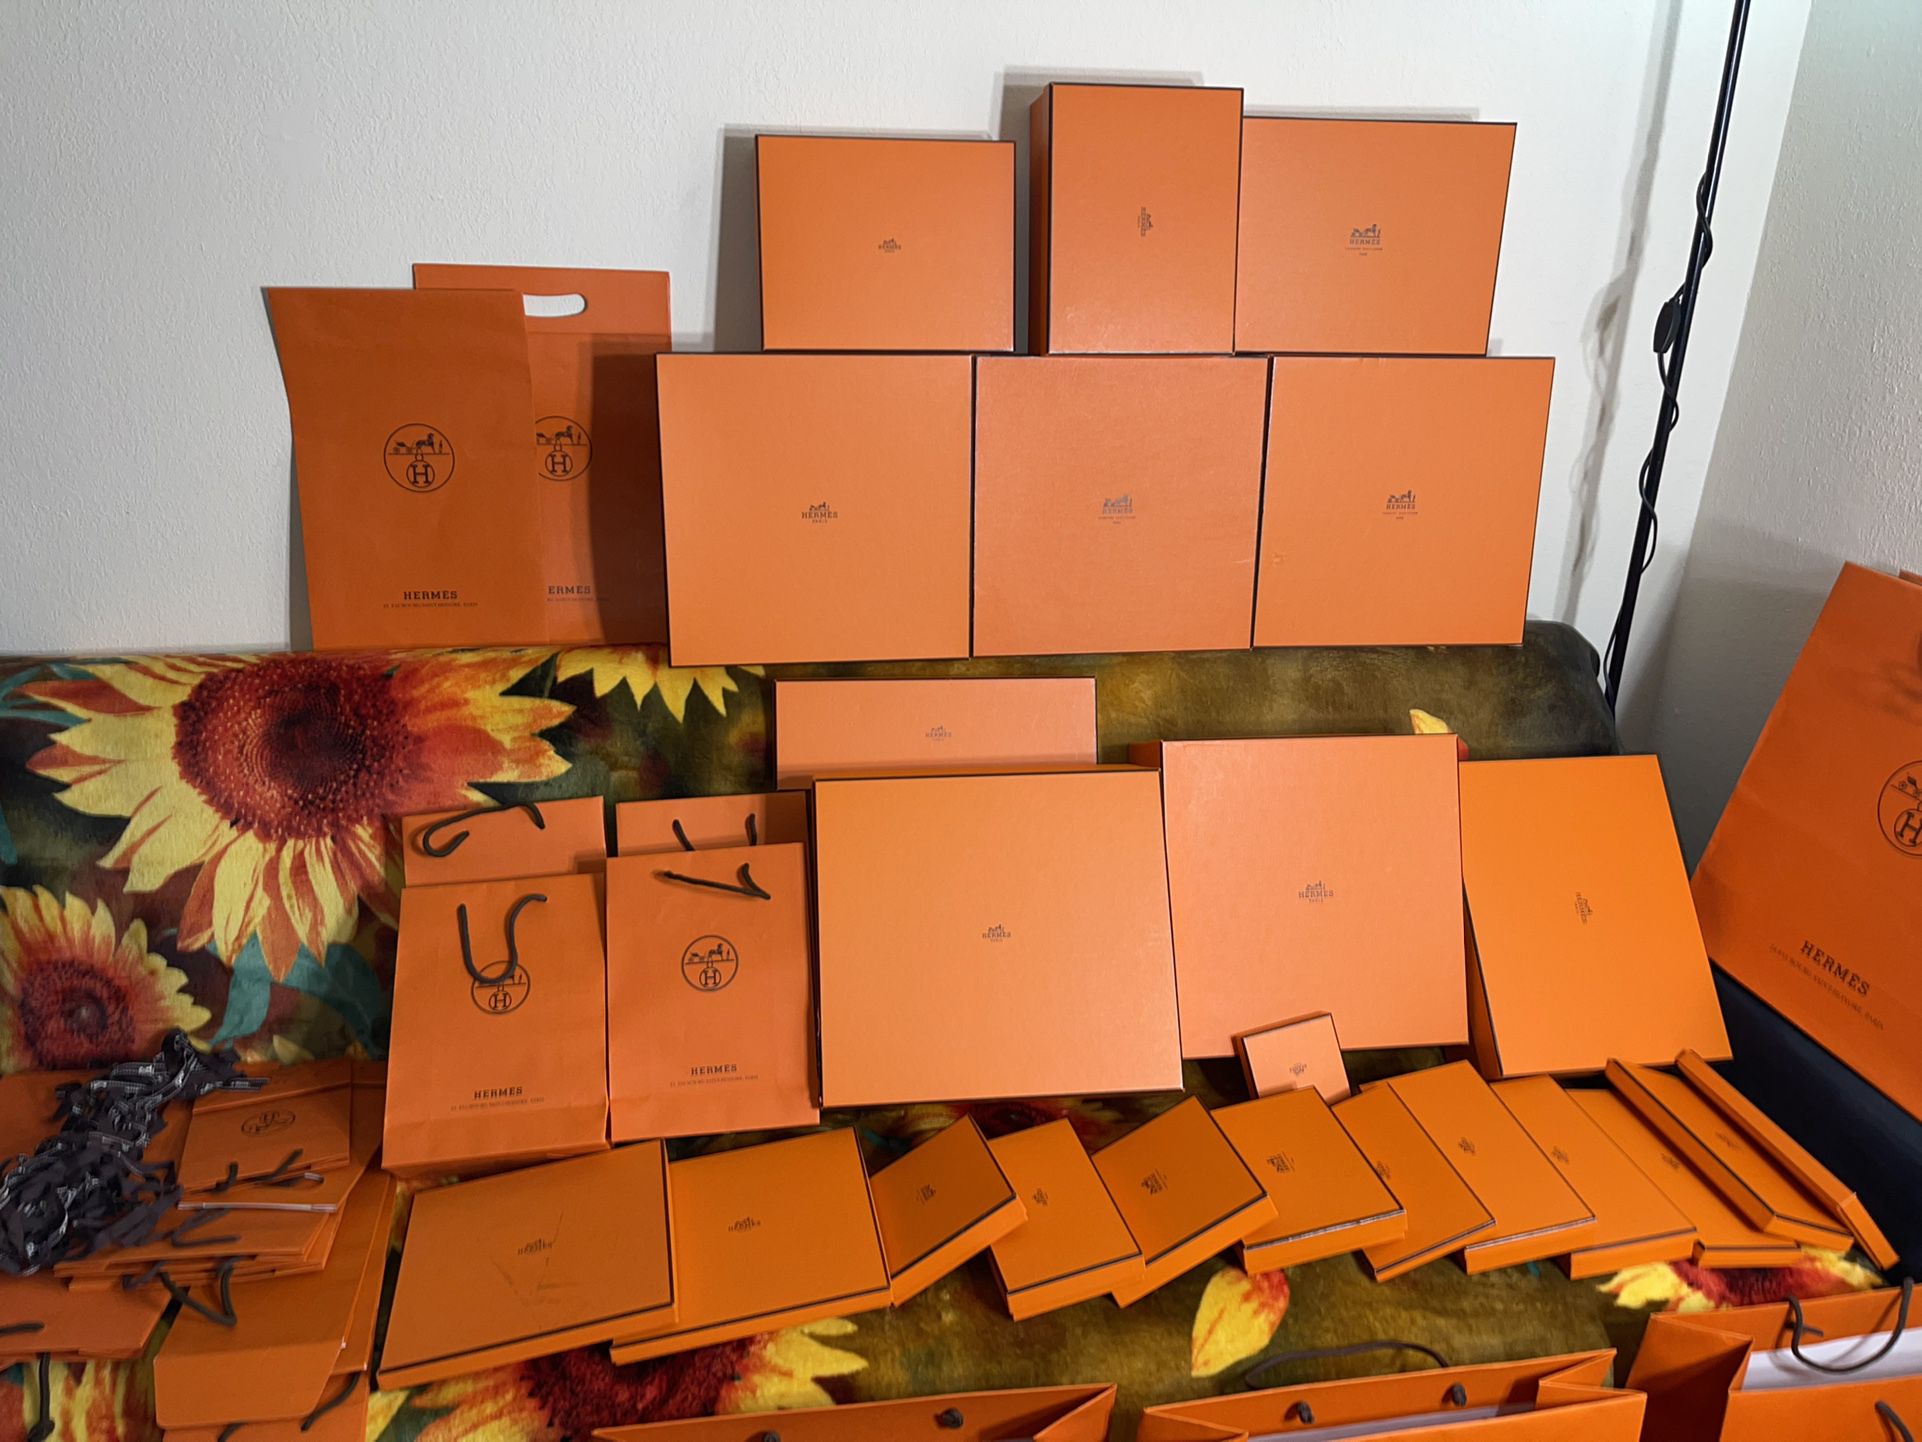 Authentic Hermes Box And Shopping Bag for Sale in Hawthorne, CA